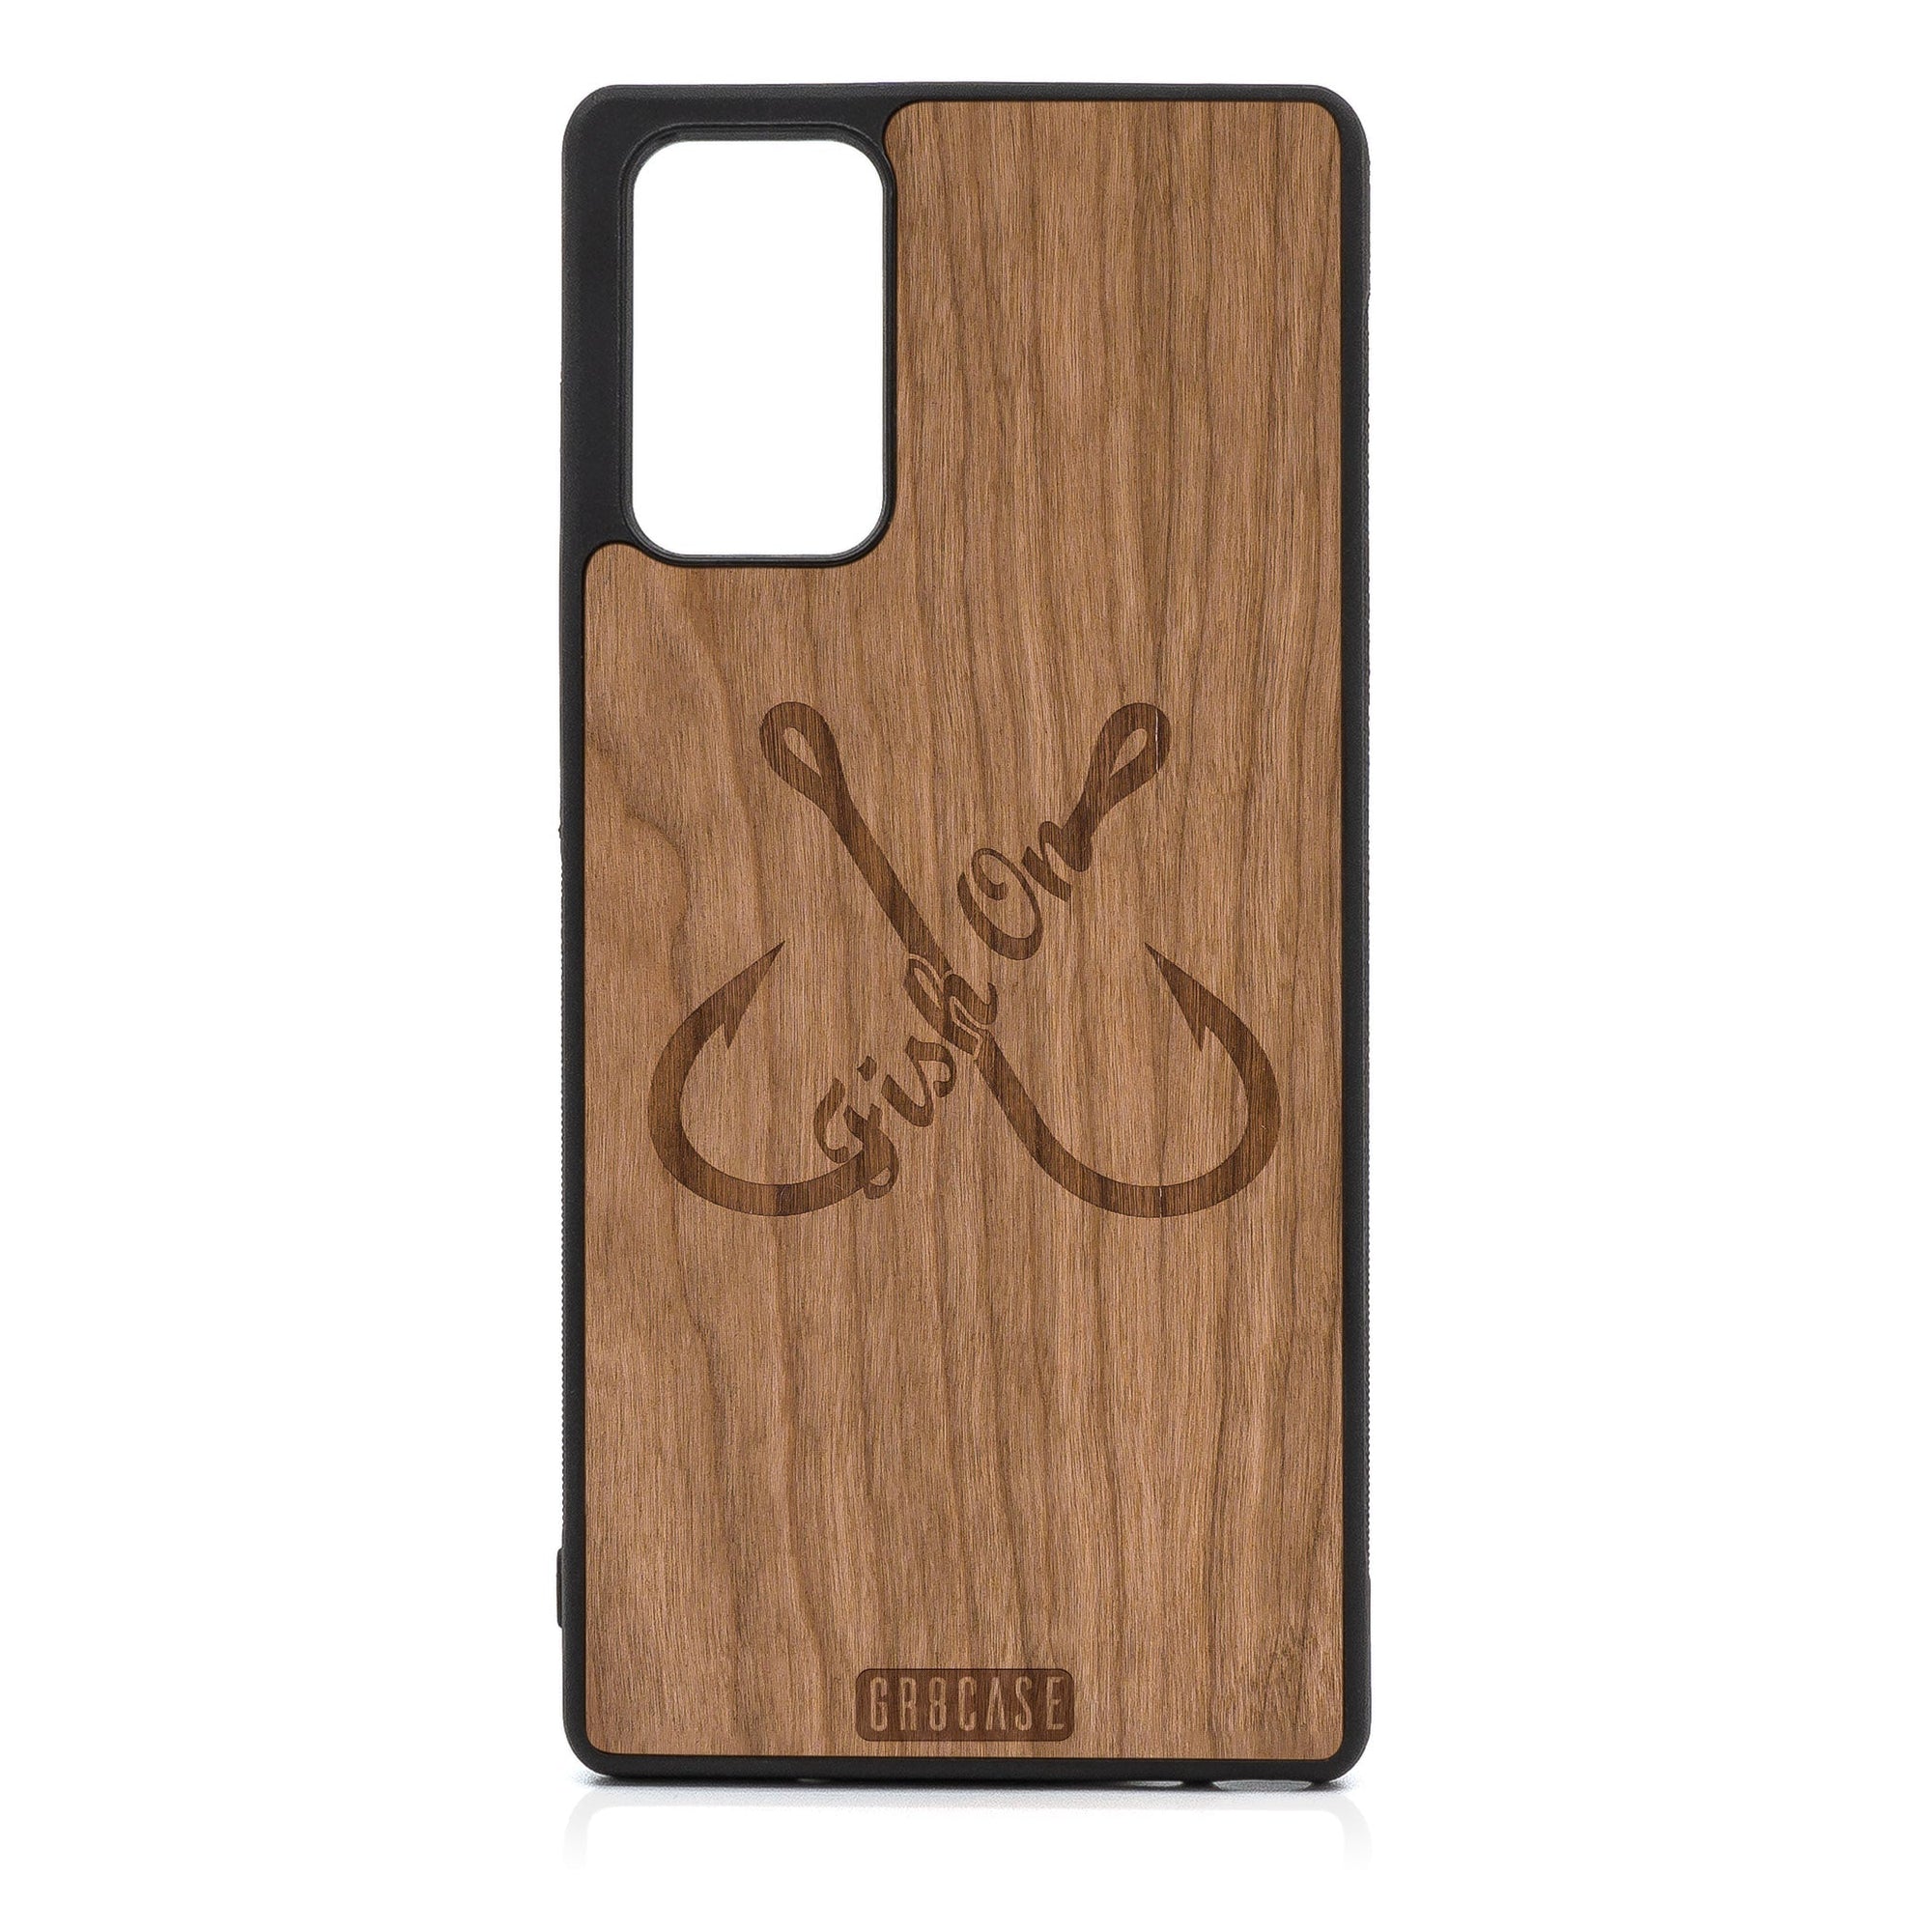 Fish On (Fish Hooks) Design Wood Case For Samsung Galaxy A72 5G